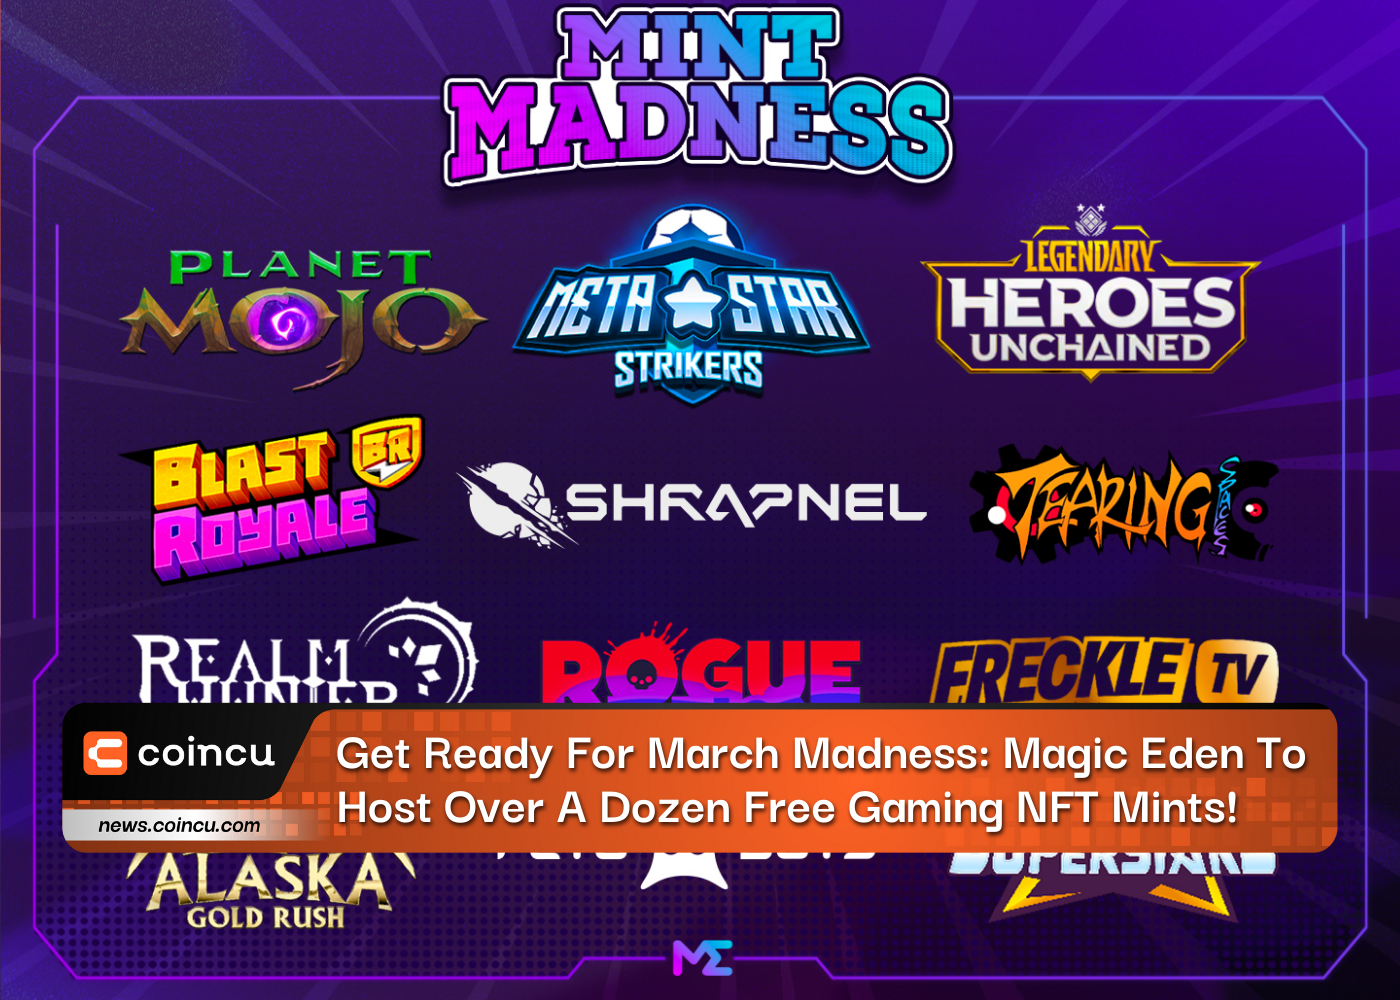 Get Ready For March Madness: Magic Eden To Host Over A Dozen Free Gaming NFT Mints!